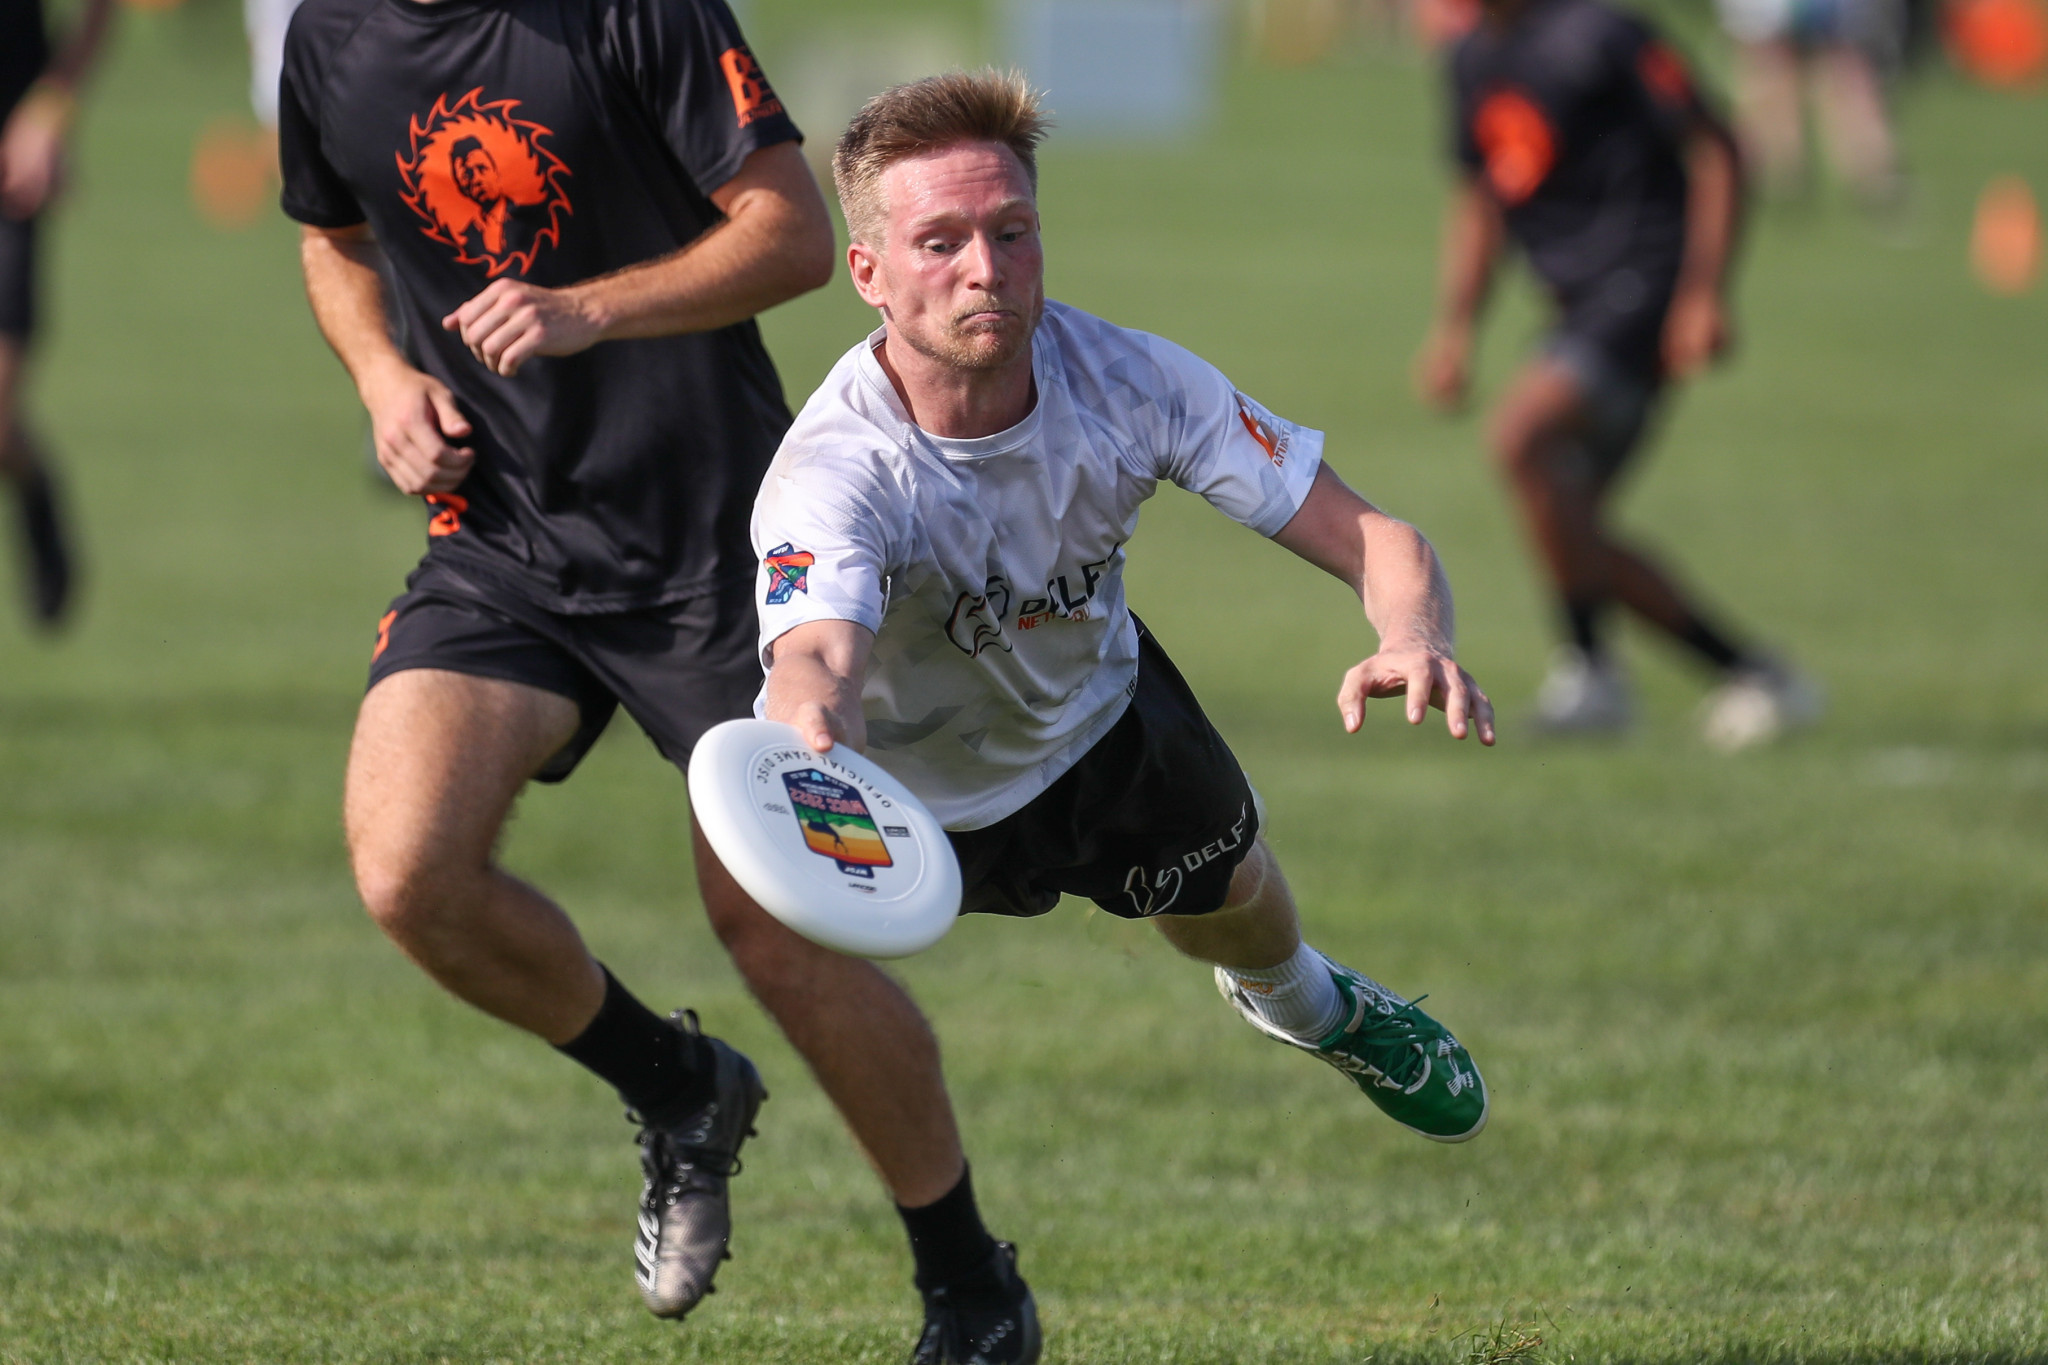 Force Electro fell to two successive 15-2 losses ©Paul Rutherford for UltiPhotos